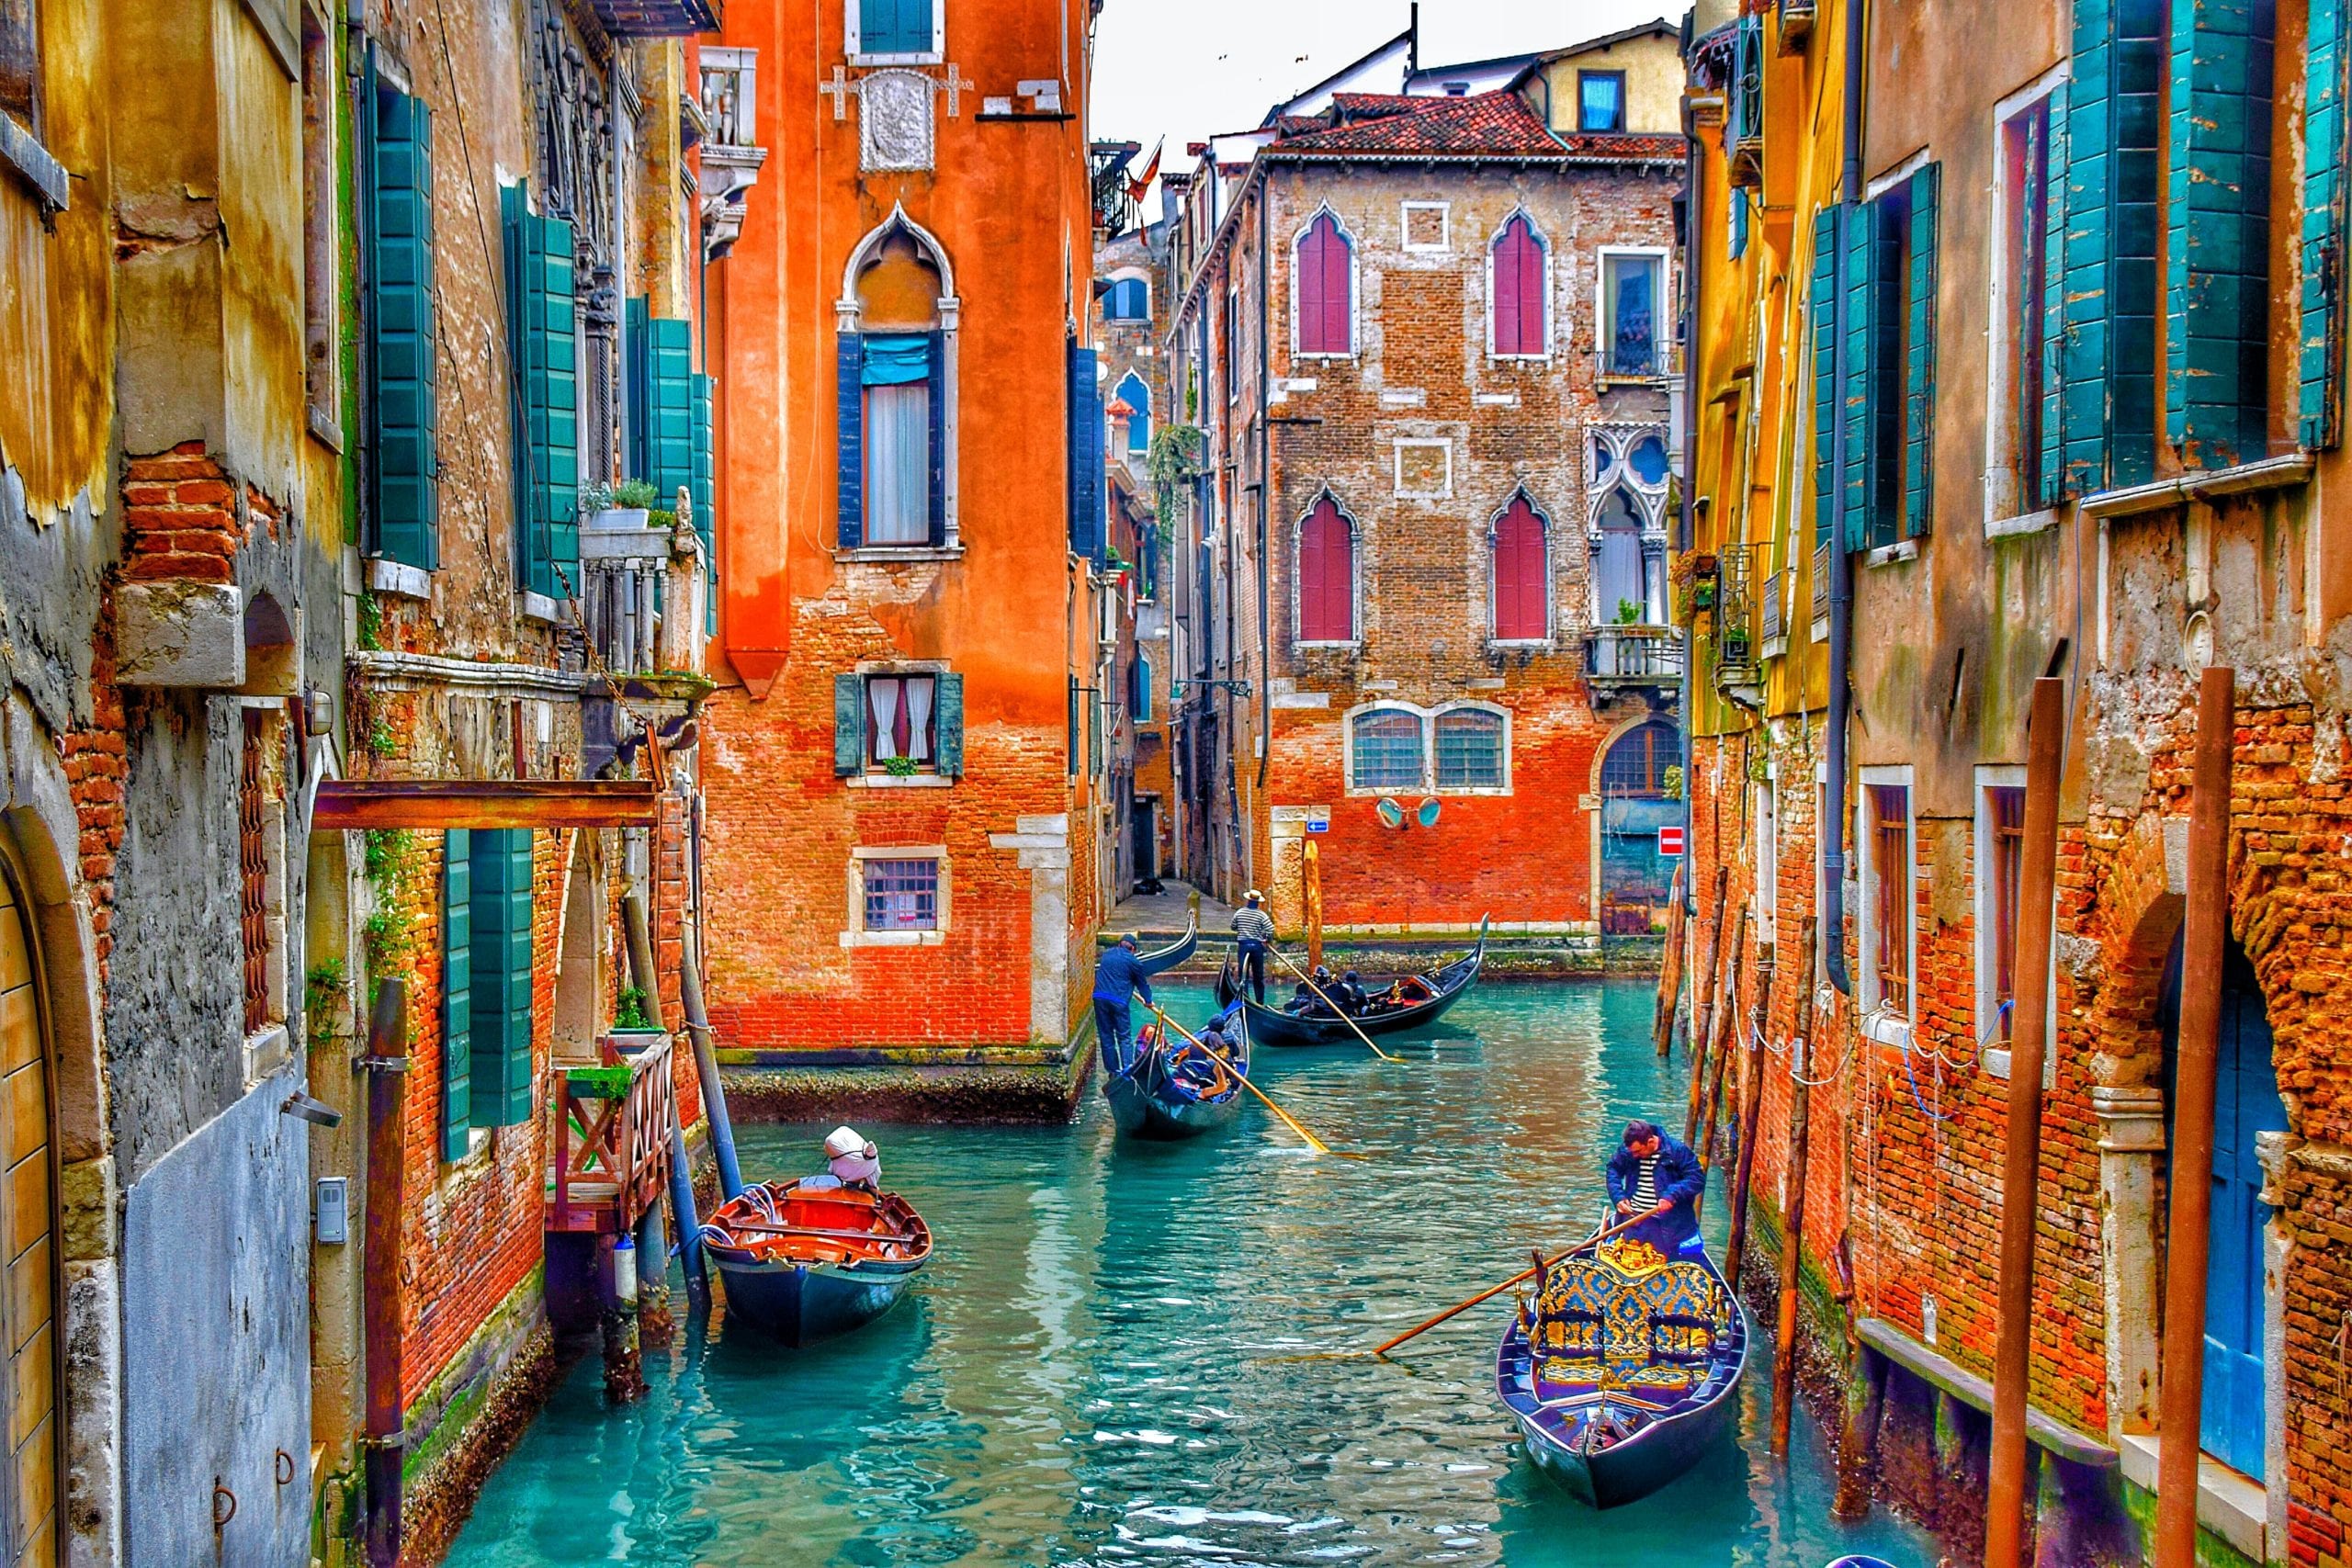 Venice canals (Photo by Tom Podmore on Unsplash)